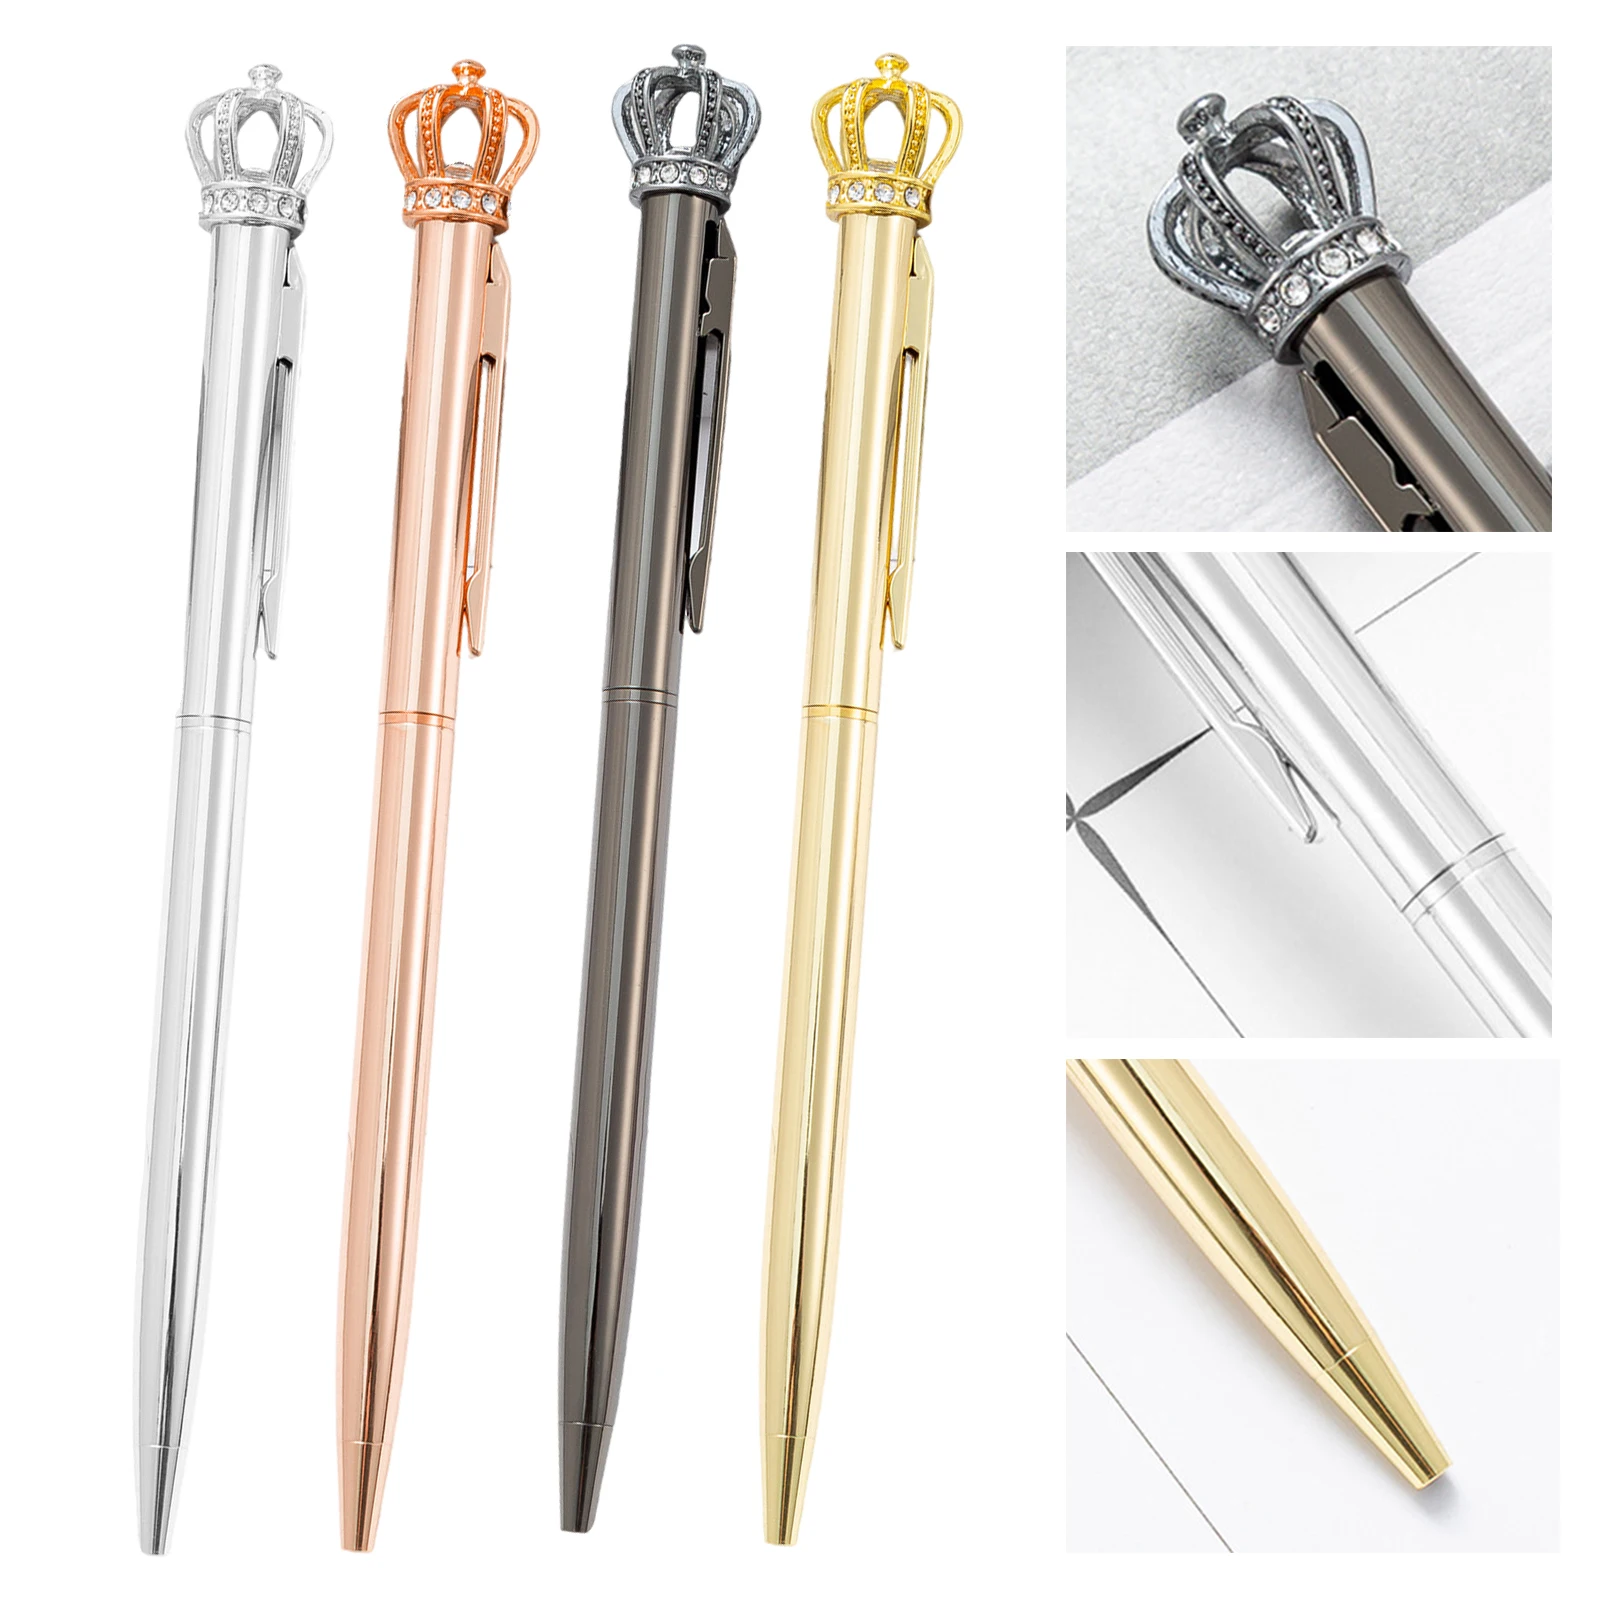 

1 Metal Ballpoint Pen beautiful Crystal Shiny Crown Interesting Ball point Pen School Stationery Office Supplies for students